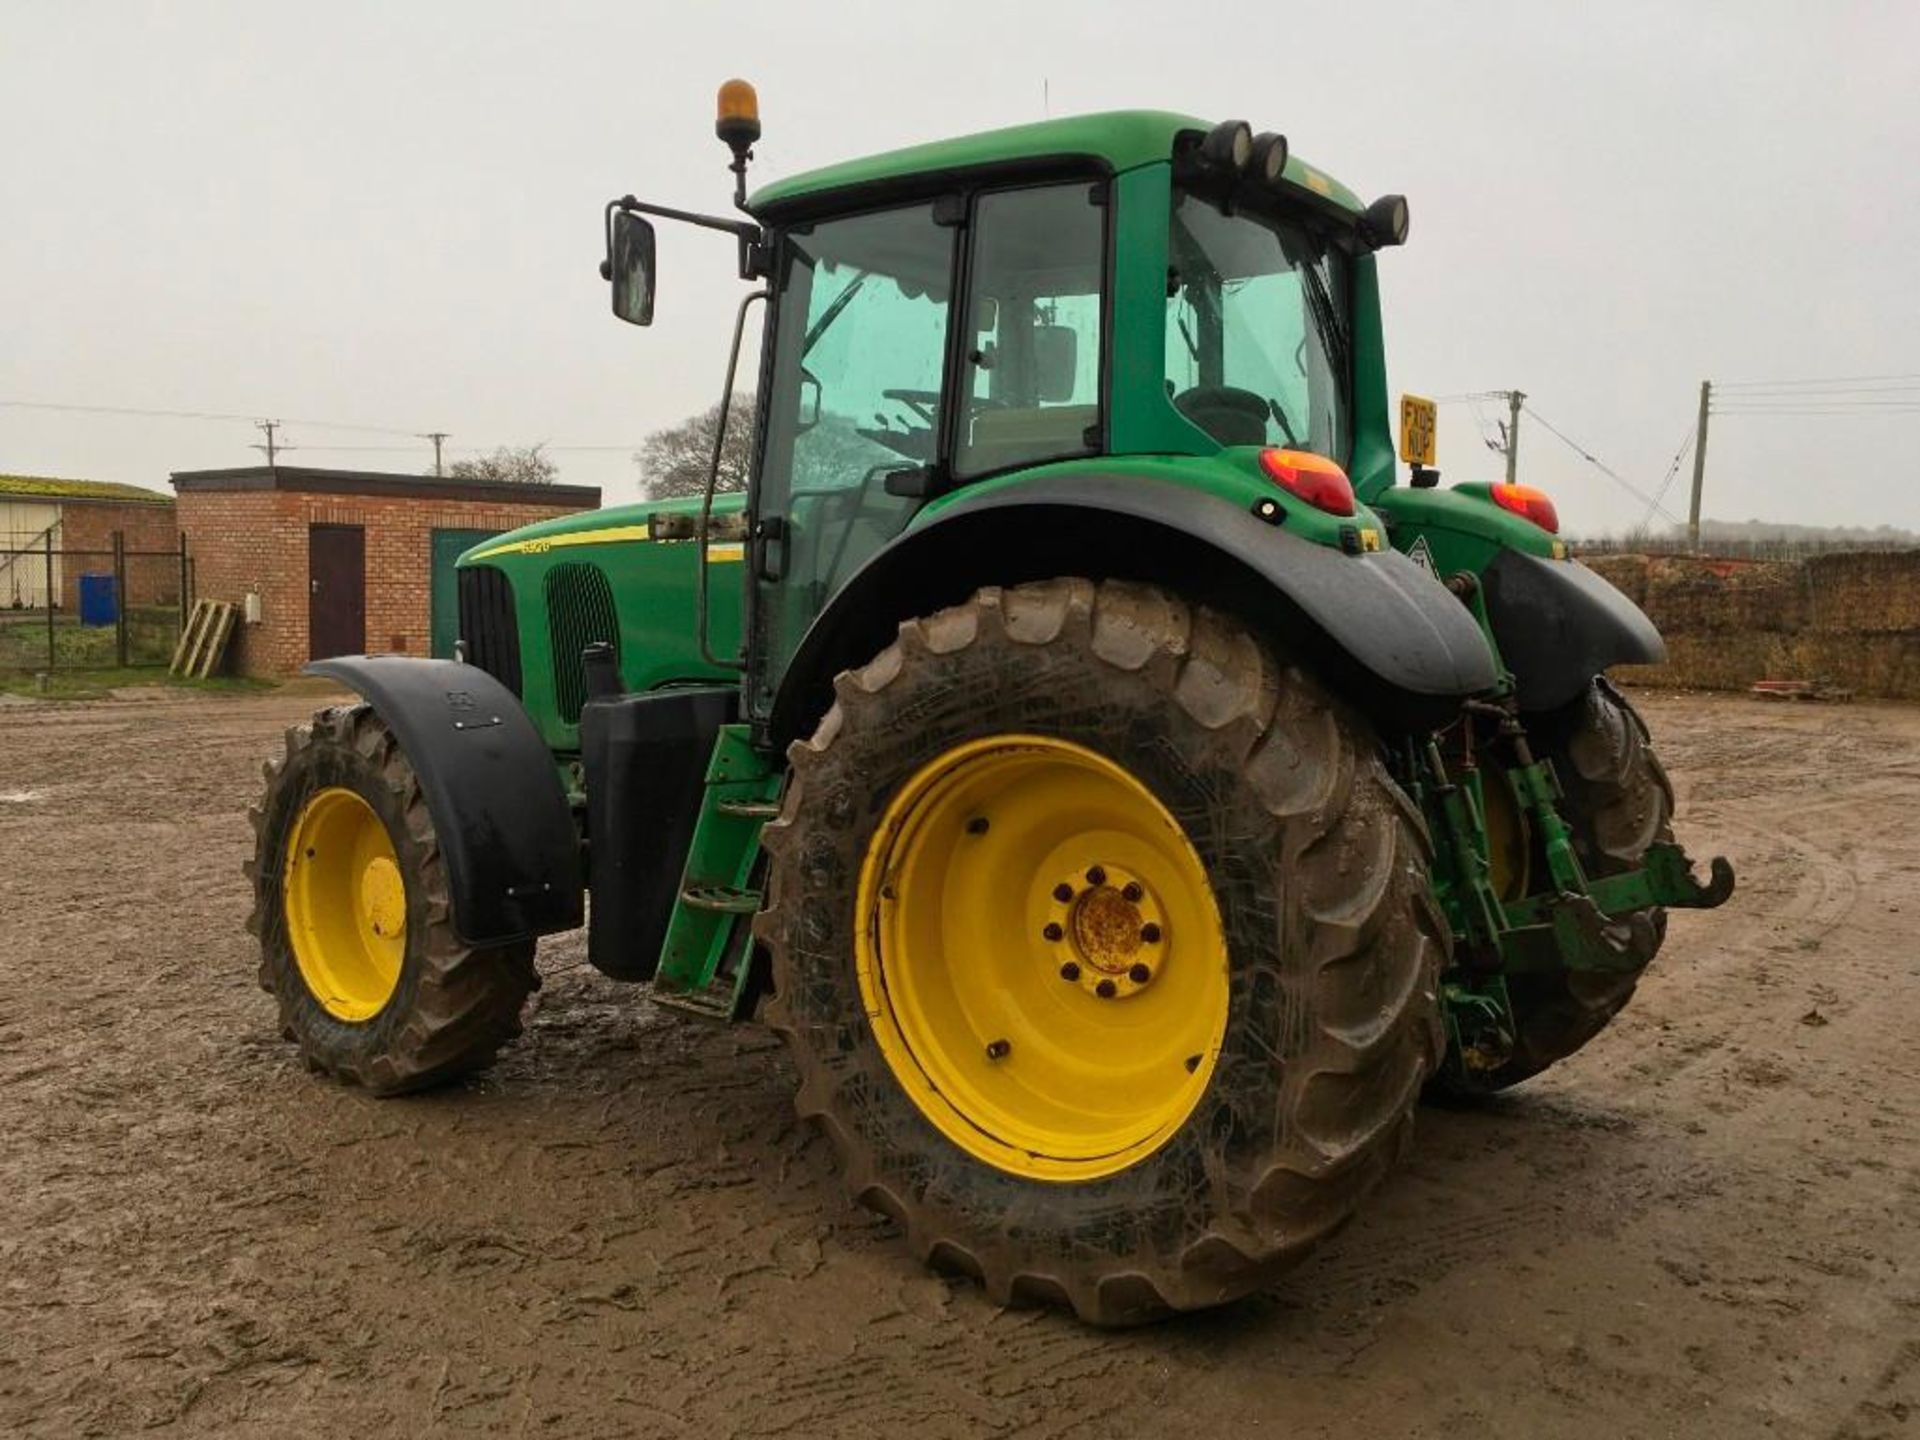 2005 John Deere 6920 40kph tractor with Power Quad gear box, 2 rear spool valves, front and rear lin - Image 6 of 9